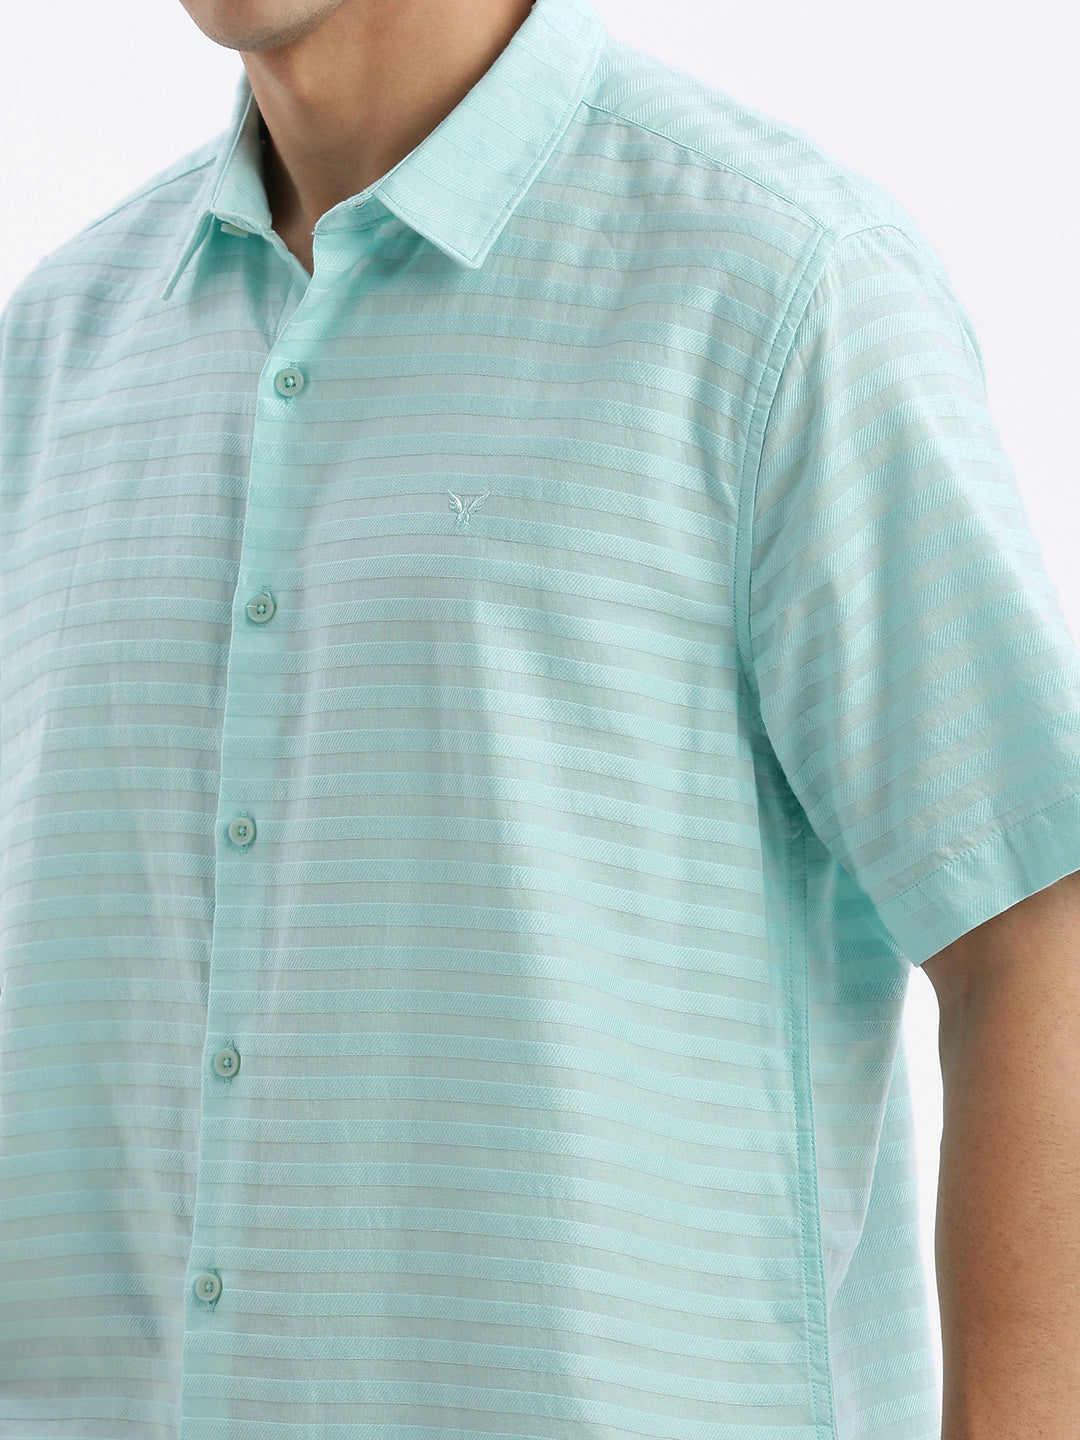 Men Spread Collar Solid Slim Fit Turquoise Blue Shirt